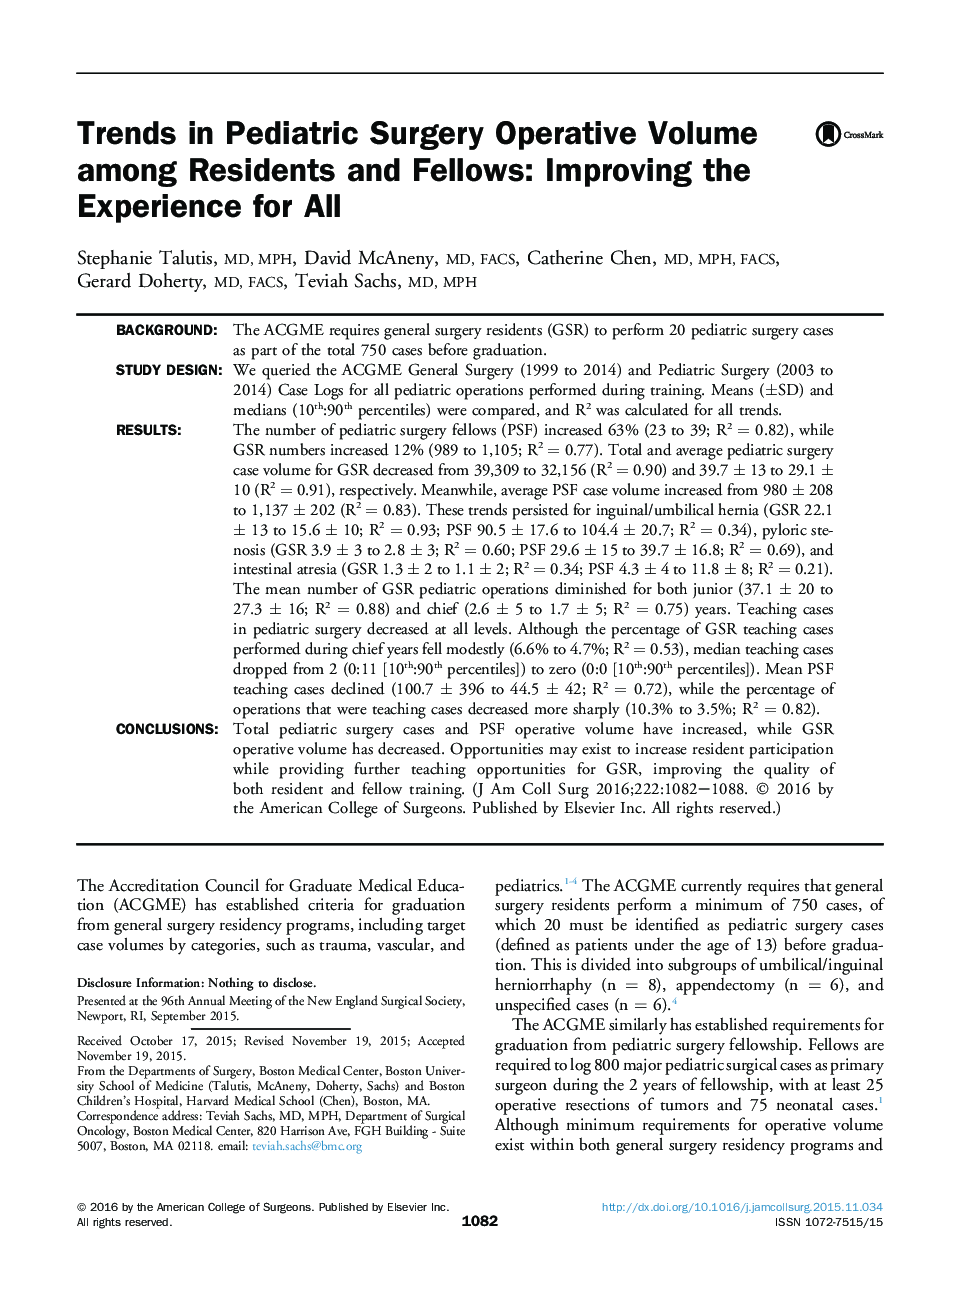 Trends in Pediatric Surgery Operative Volume among Residents and Fellows: Improving the Experience for All 